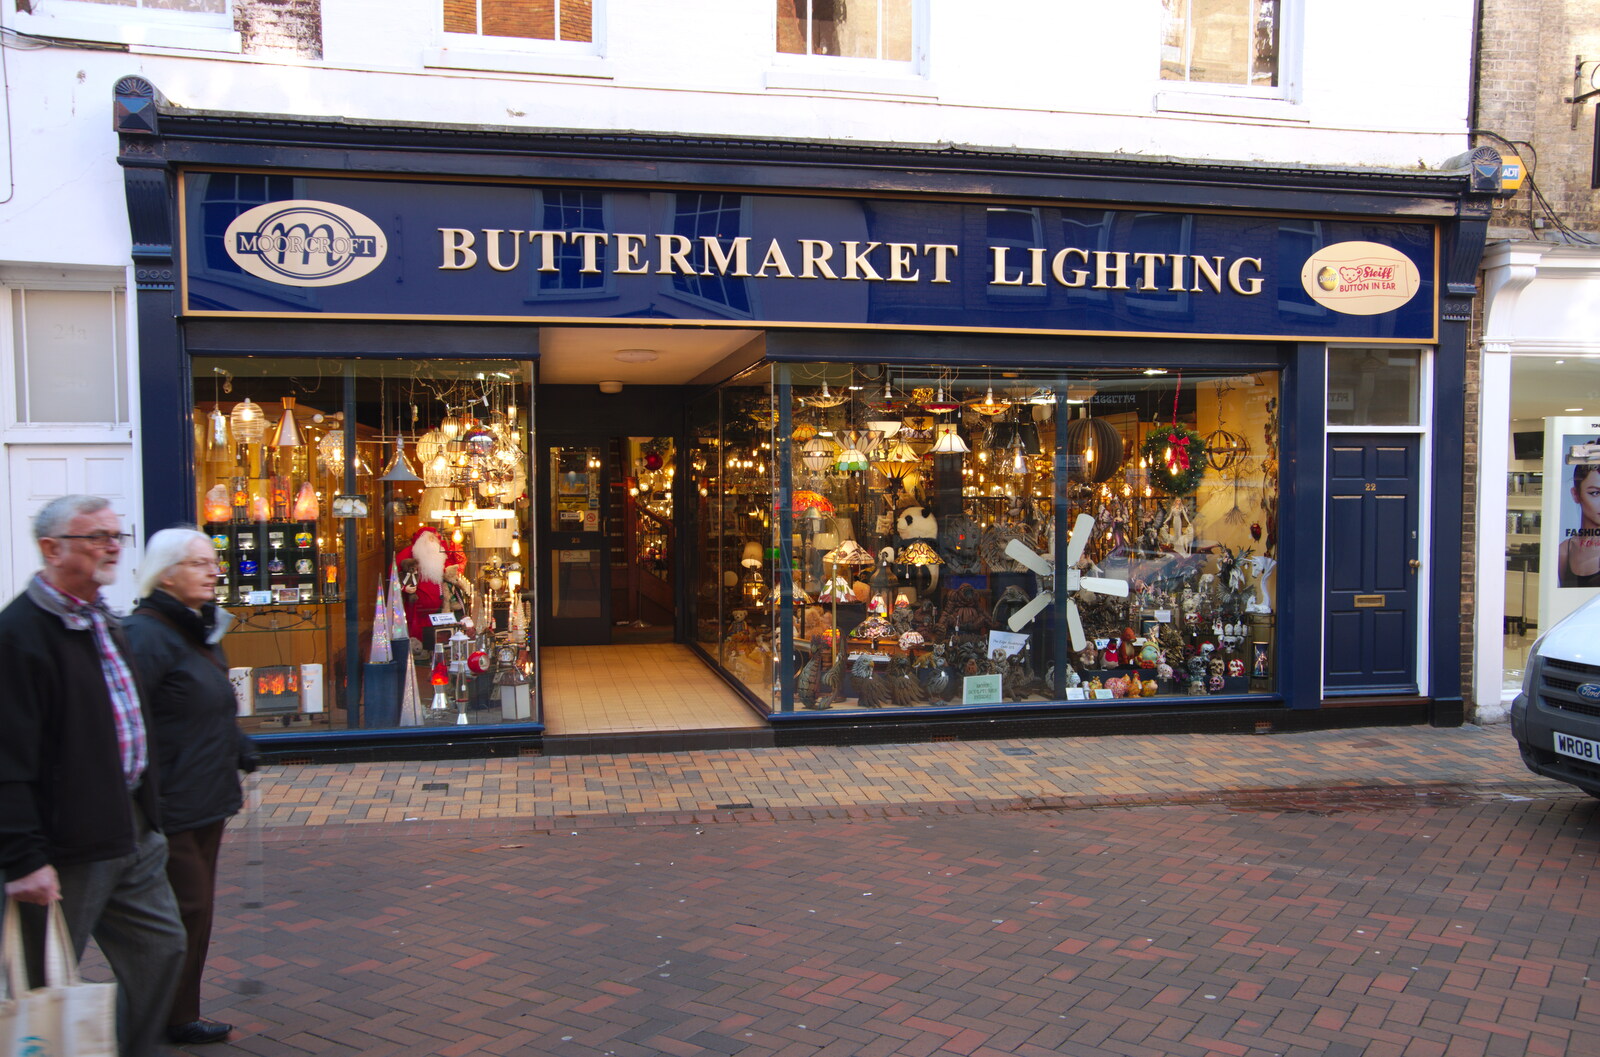 A warm glow from Buttermarket Lighting from Exam Day Dereliction, Ipswich, Suffolk - 13th November 2019